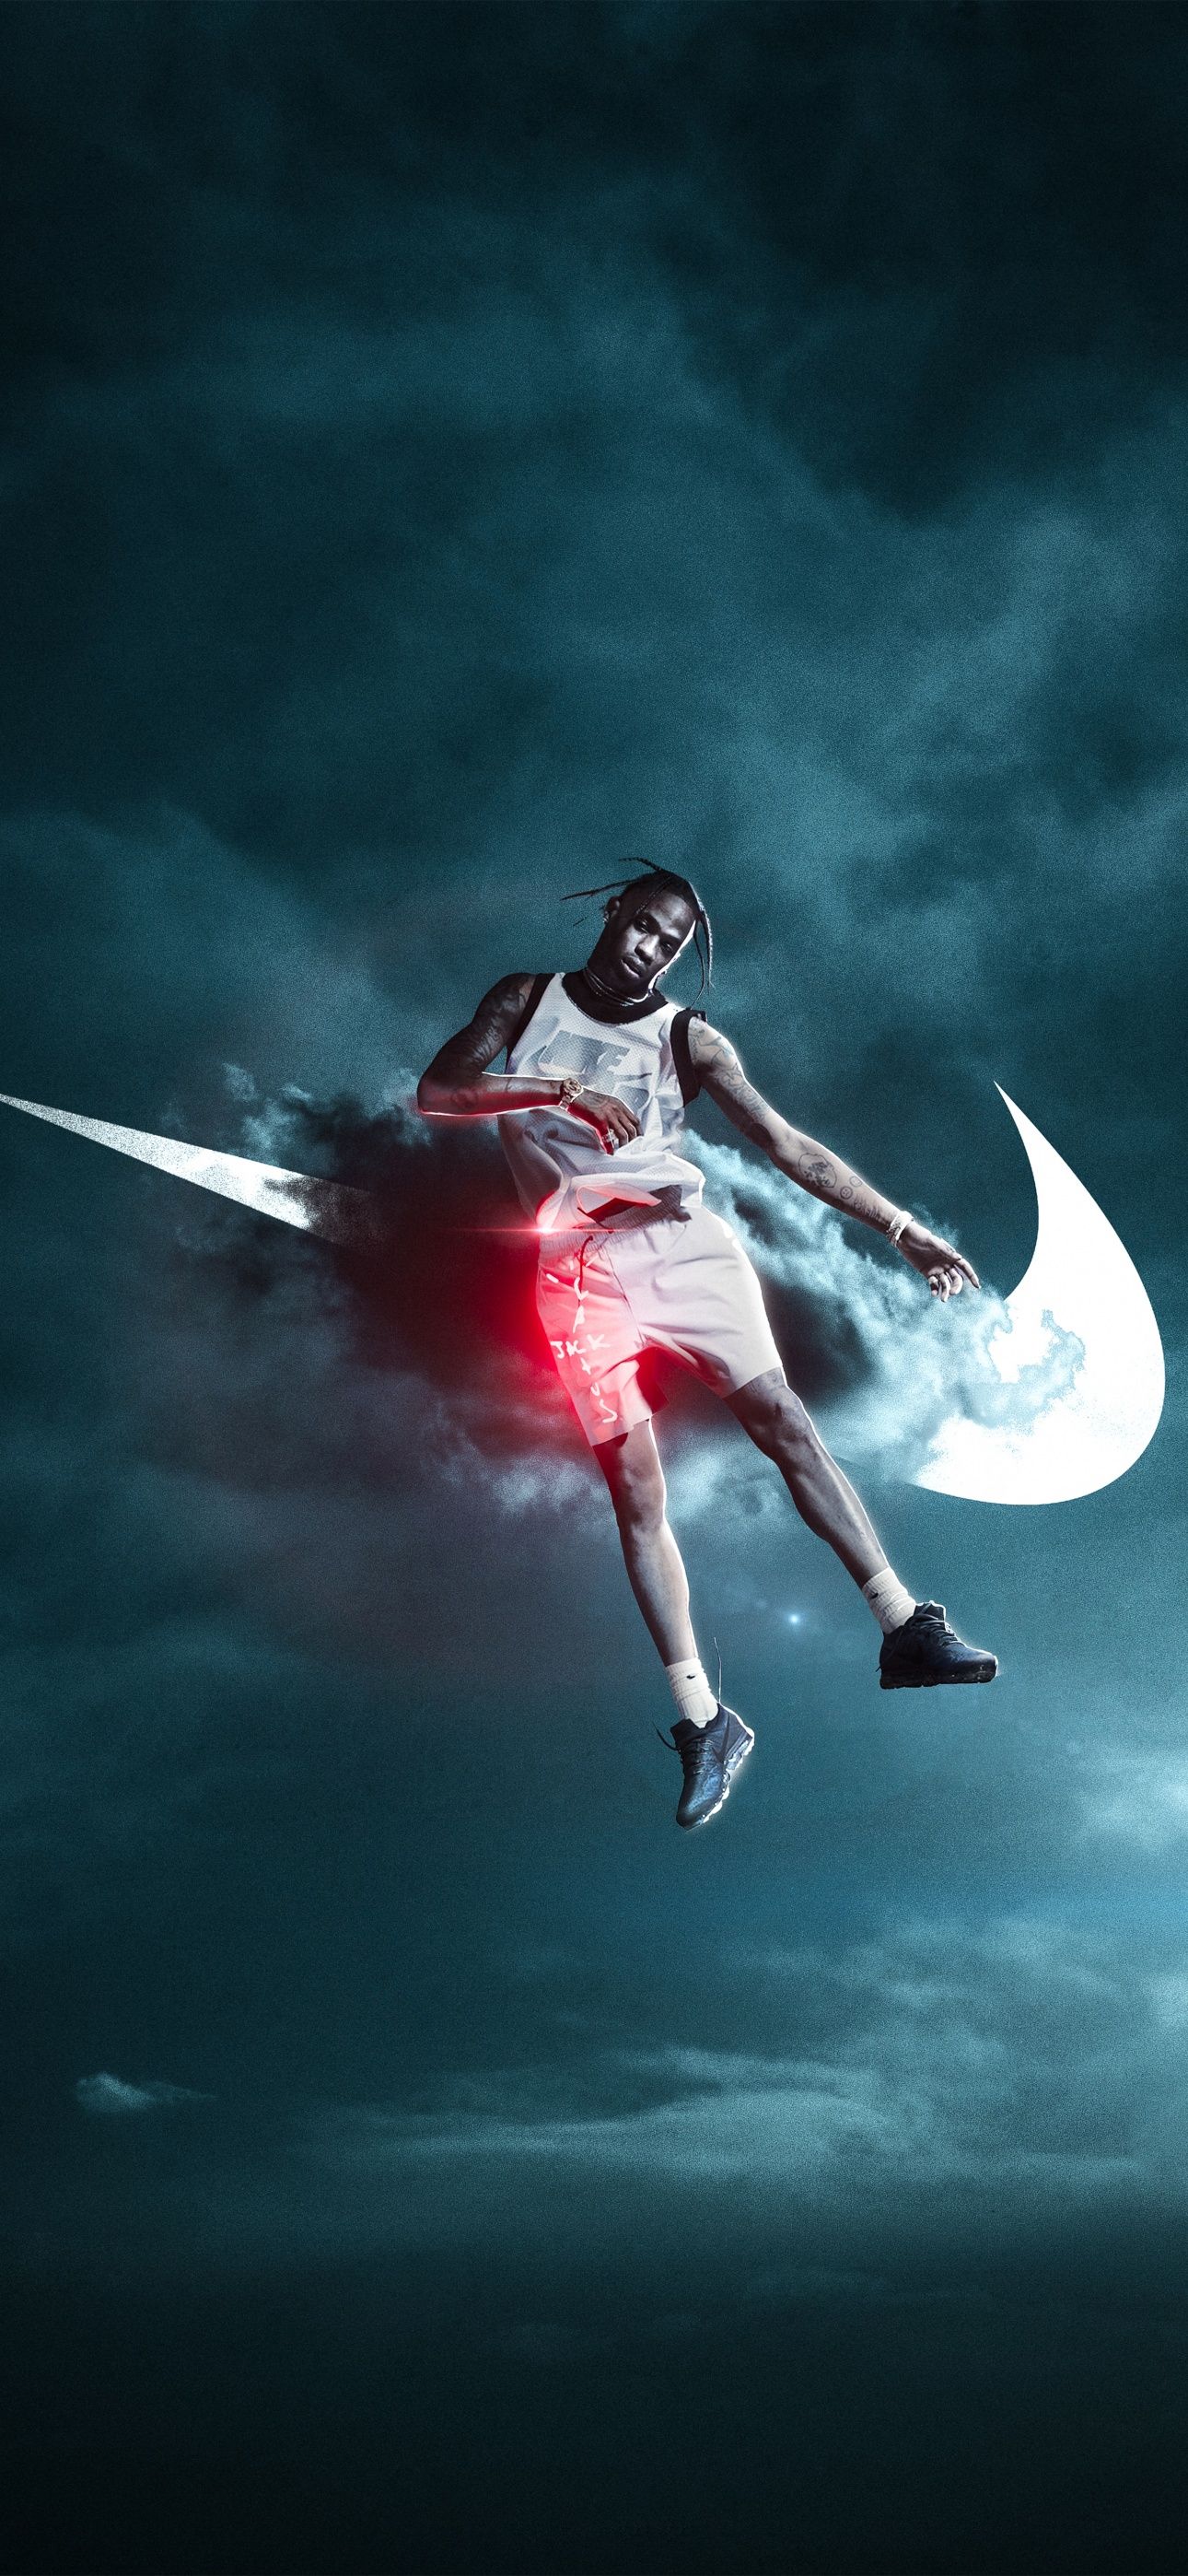 IPhone wallpaper of a basketball player in the air, jumping and holding a ball, wearing a white jersey and black shoes, with a huge Nike logo in the background. - Travis Scott